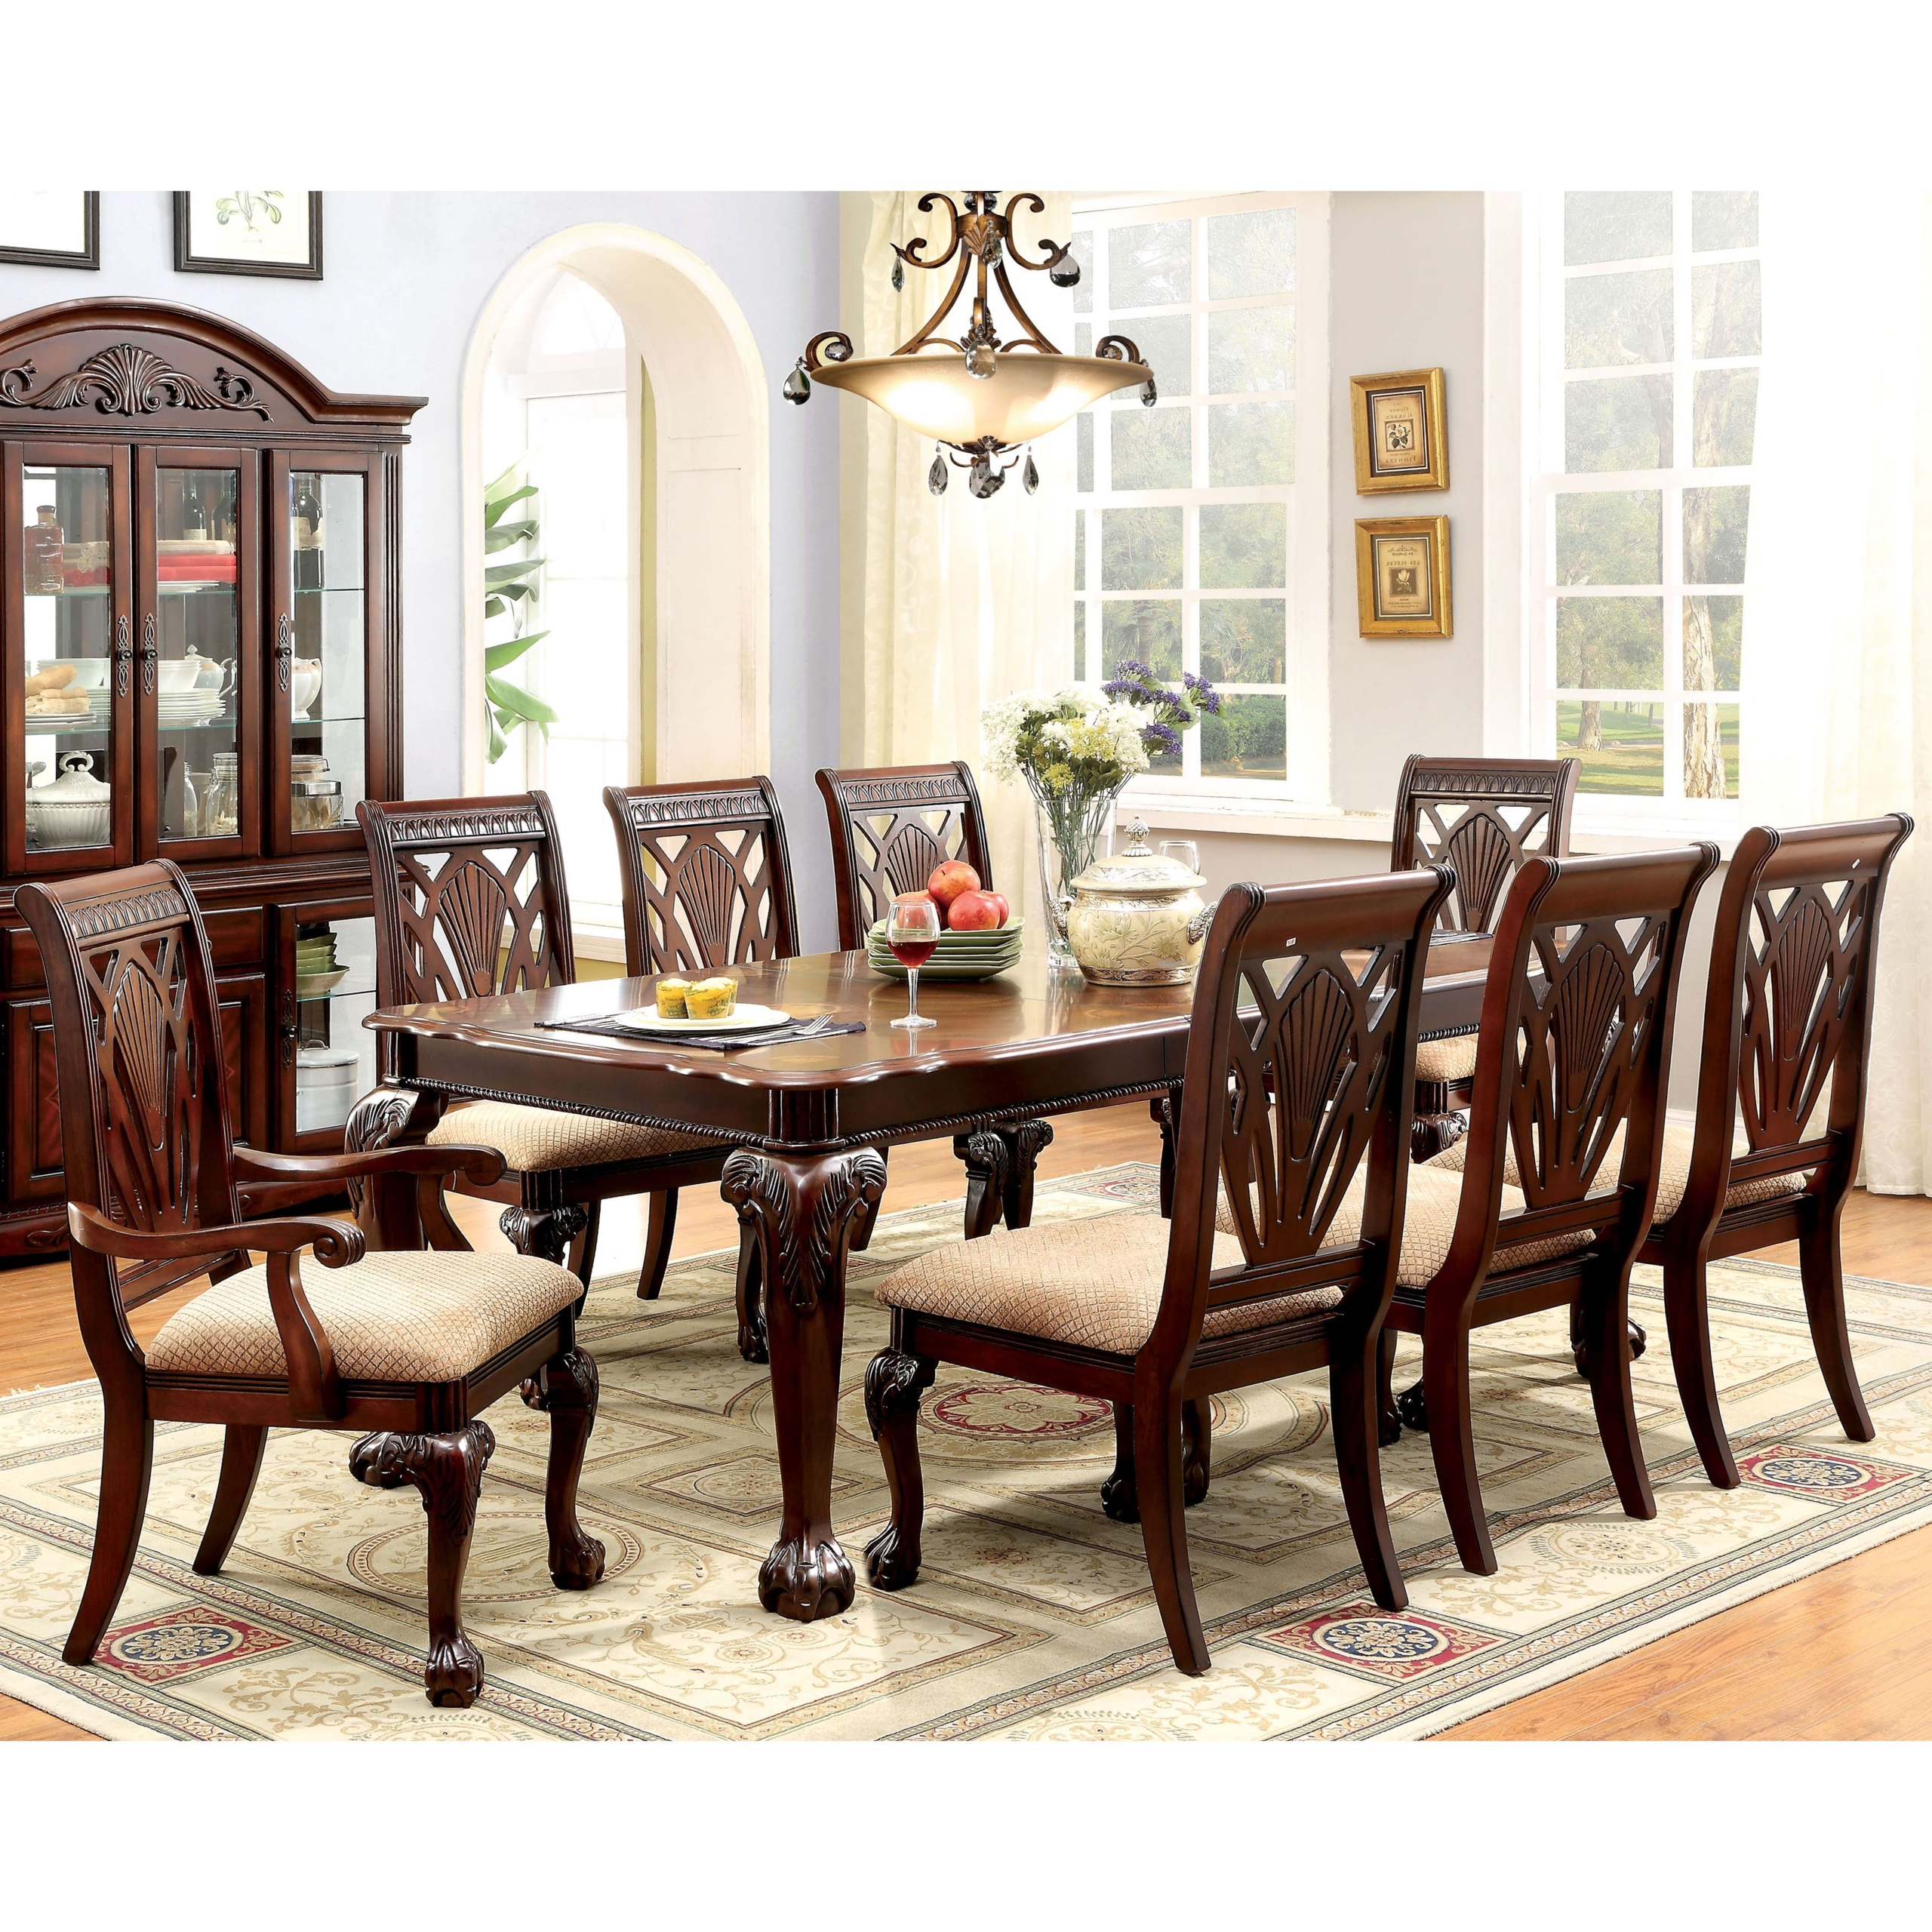 Formal cherry dining room sets 7